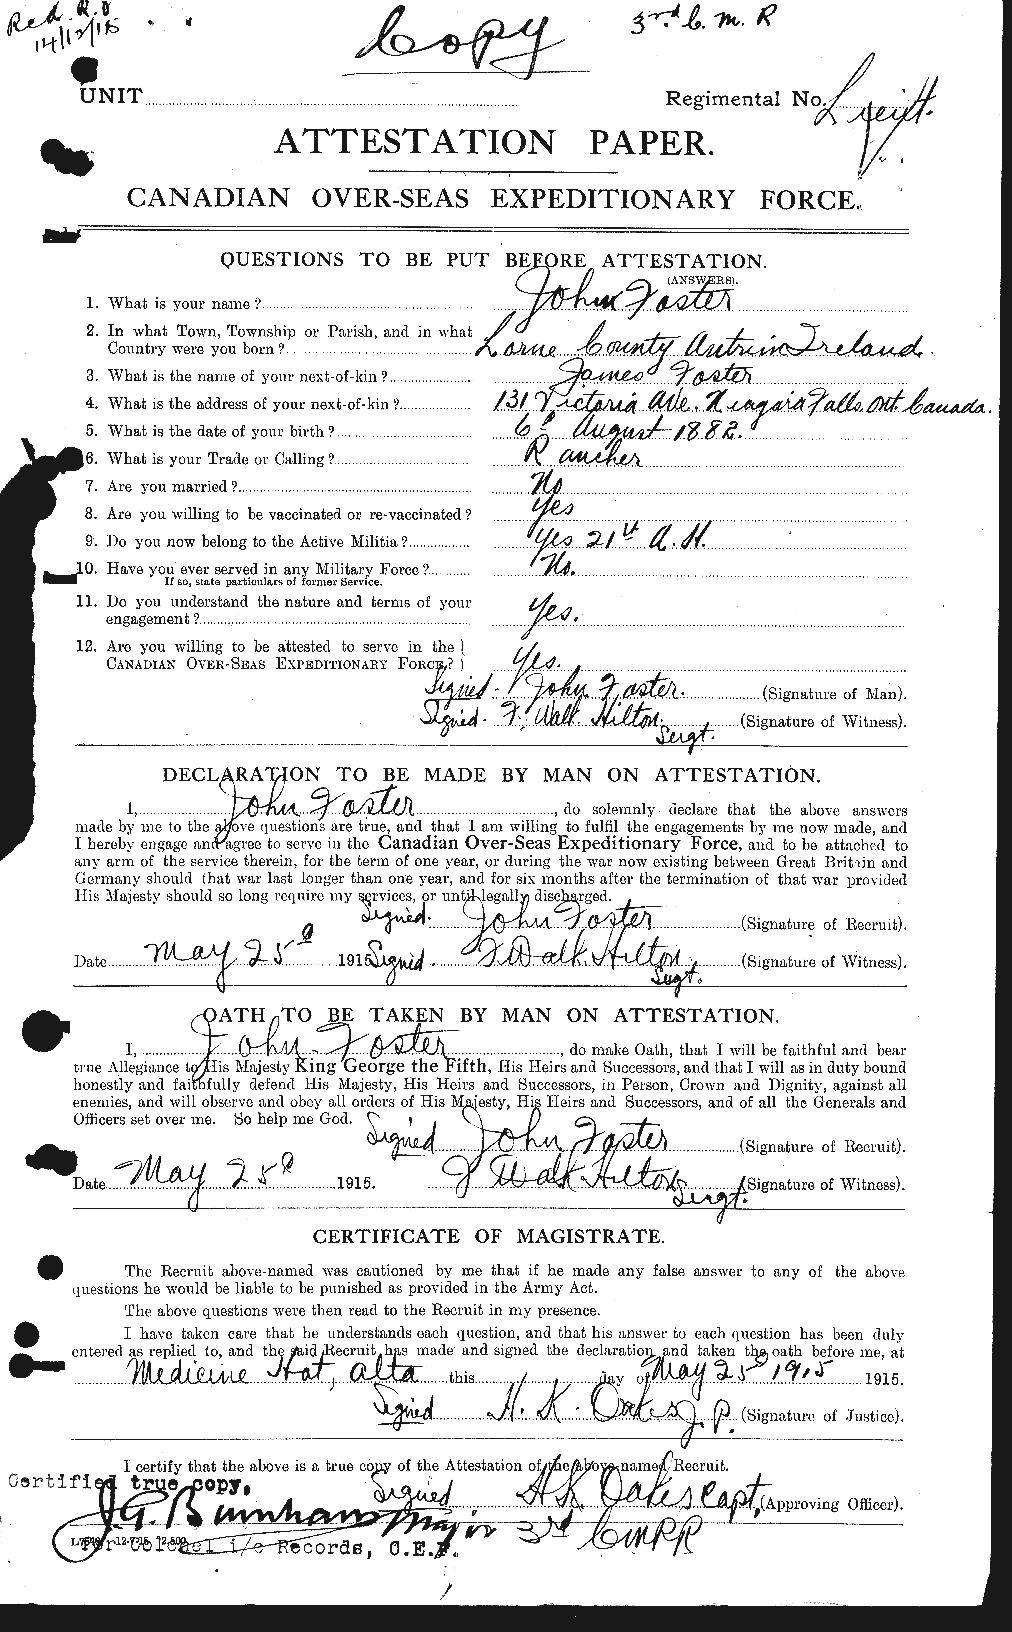 Personnel Records of the First World War - CEF 333328a